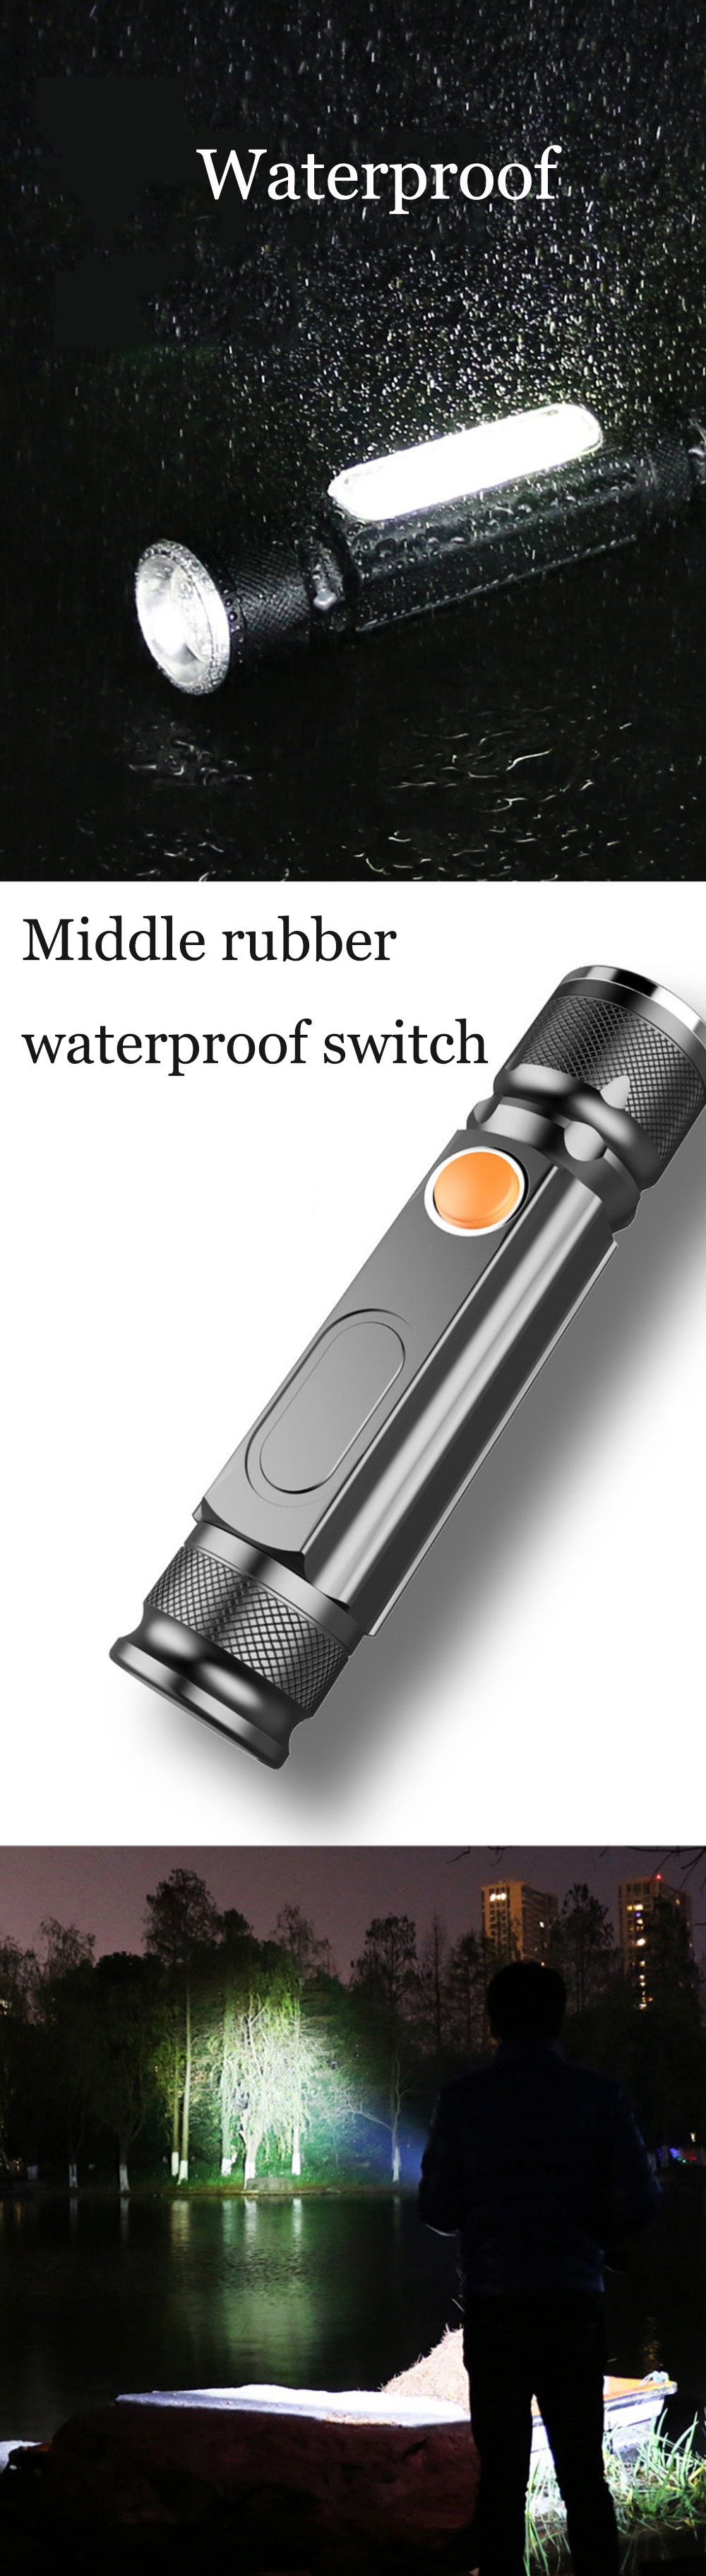 800LM-T6COB-Zoomable-Multifunction-LED-Flashlight-with-Magnet-Handy18650-Li-Battery-USB-Rechargeable-1830912-4